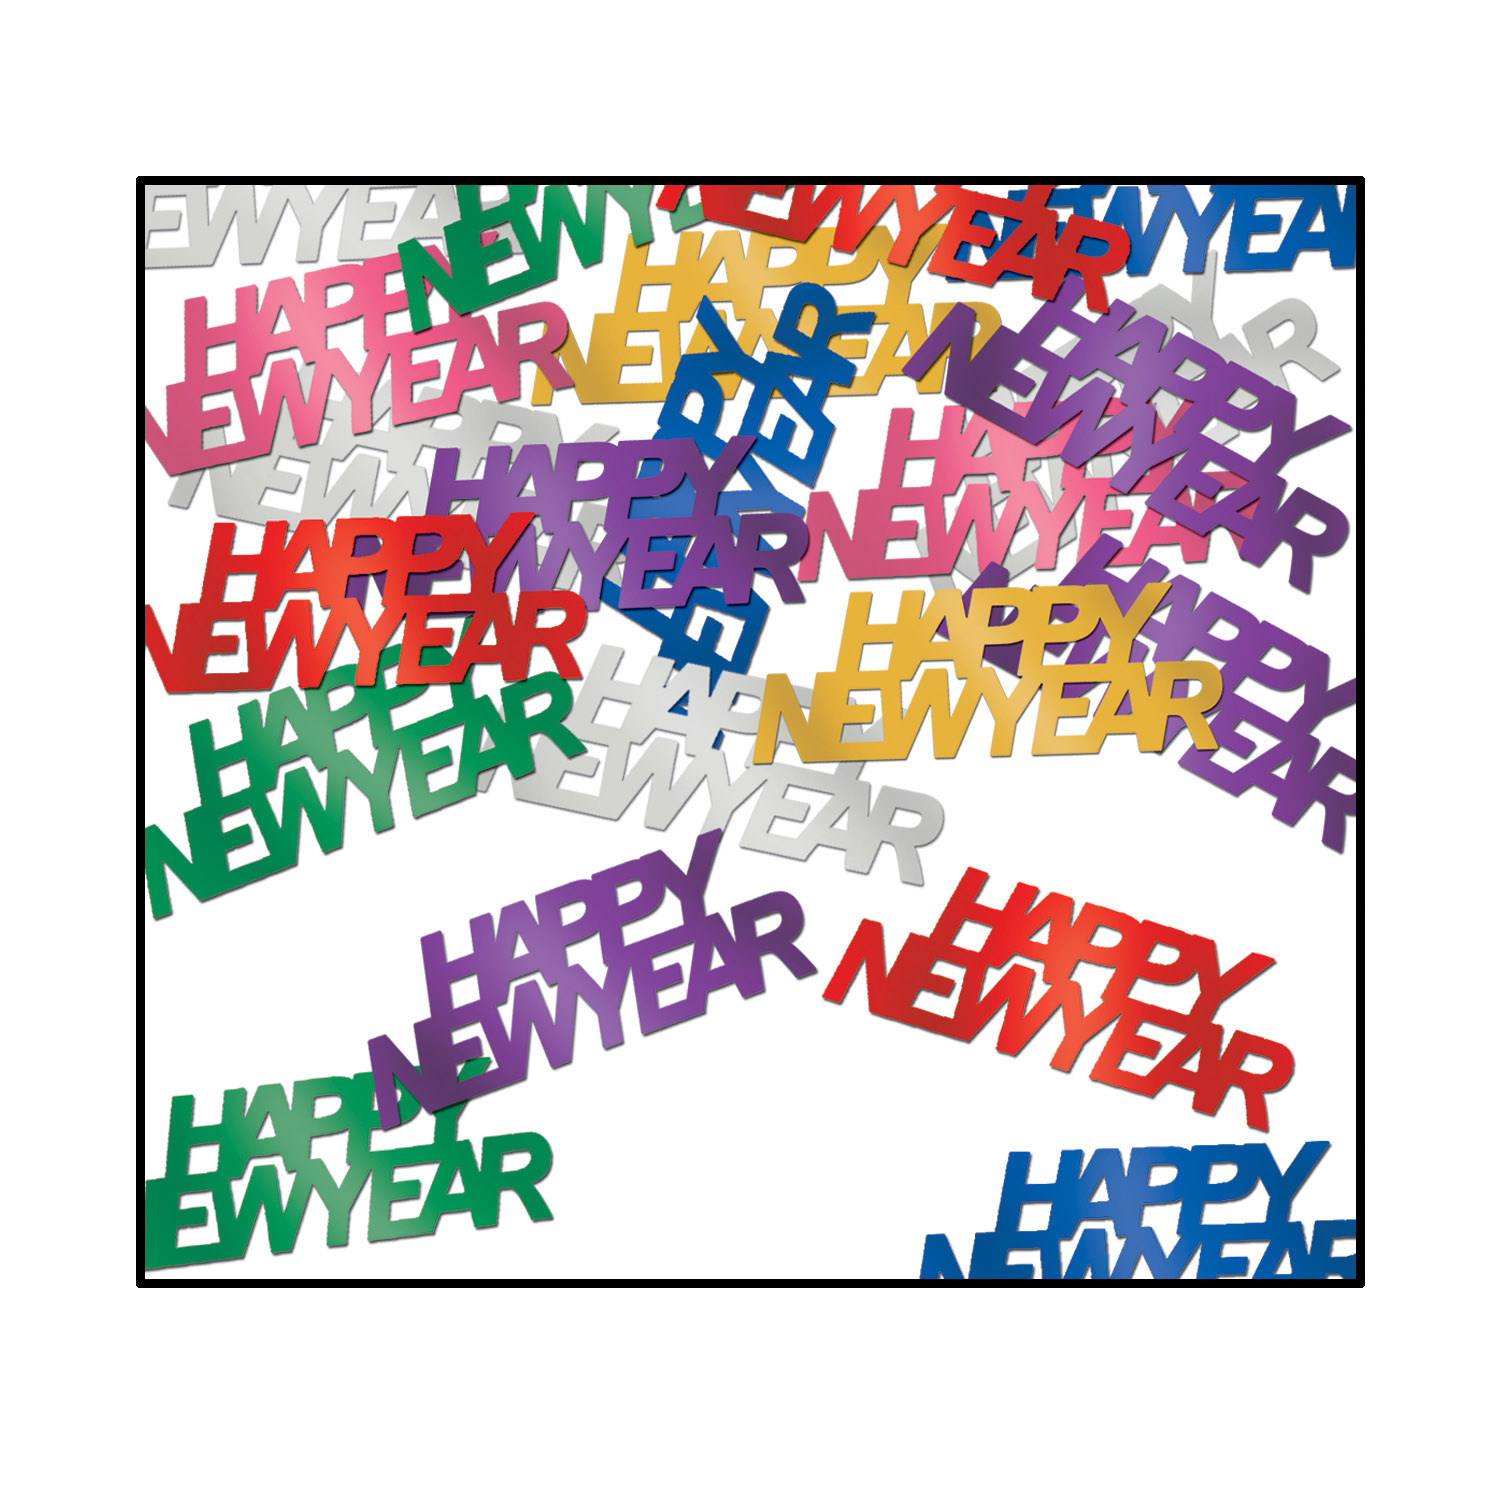 Metallic material multi-colored confetti that reads "Happy New Year".